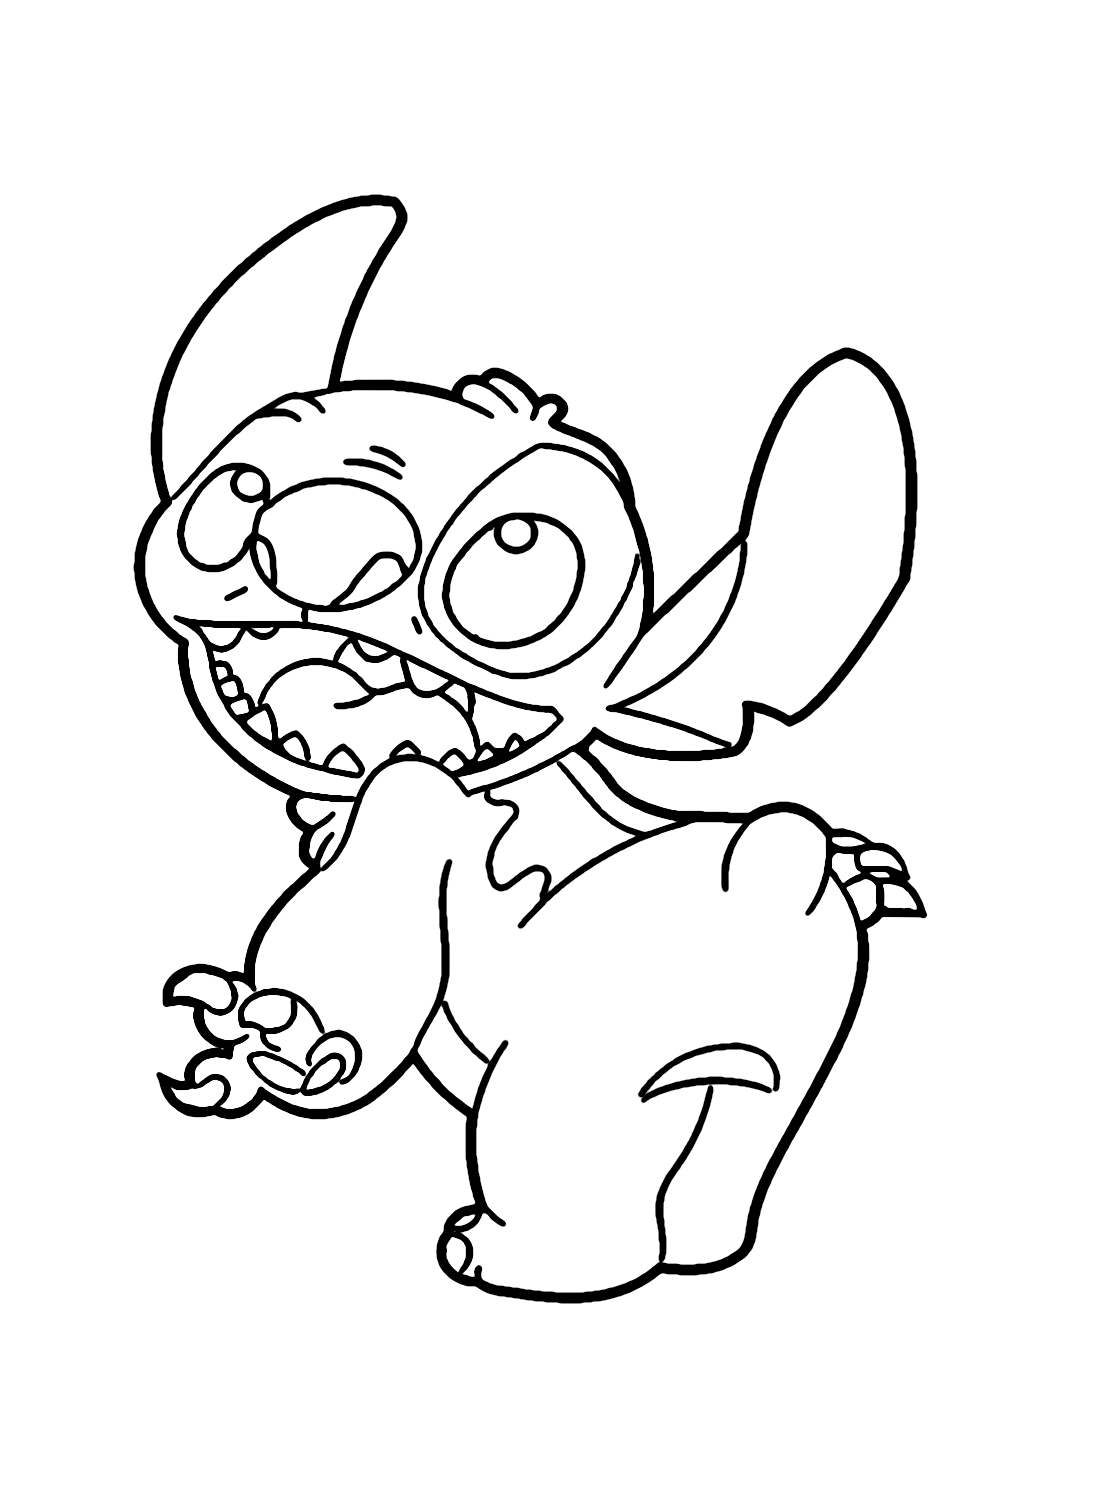 Easy Stitch Coloring Pages Coloring Page